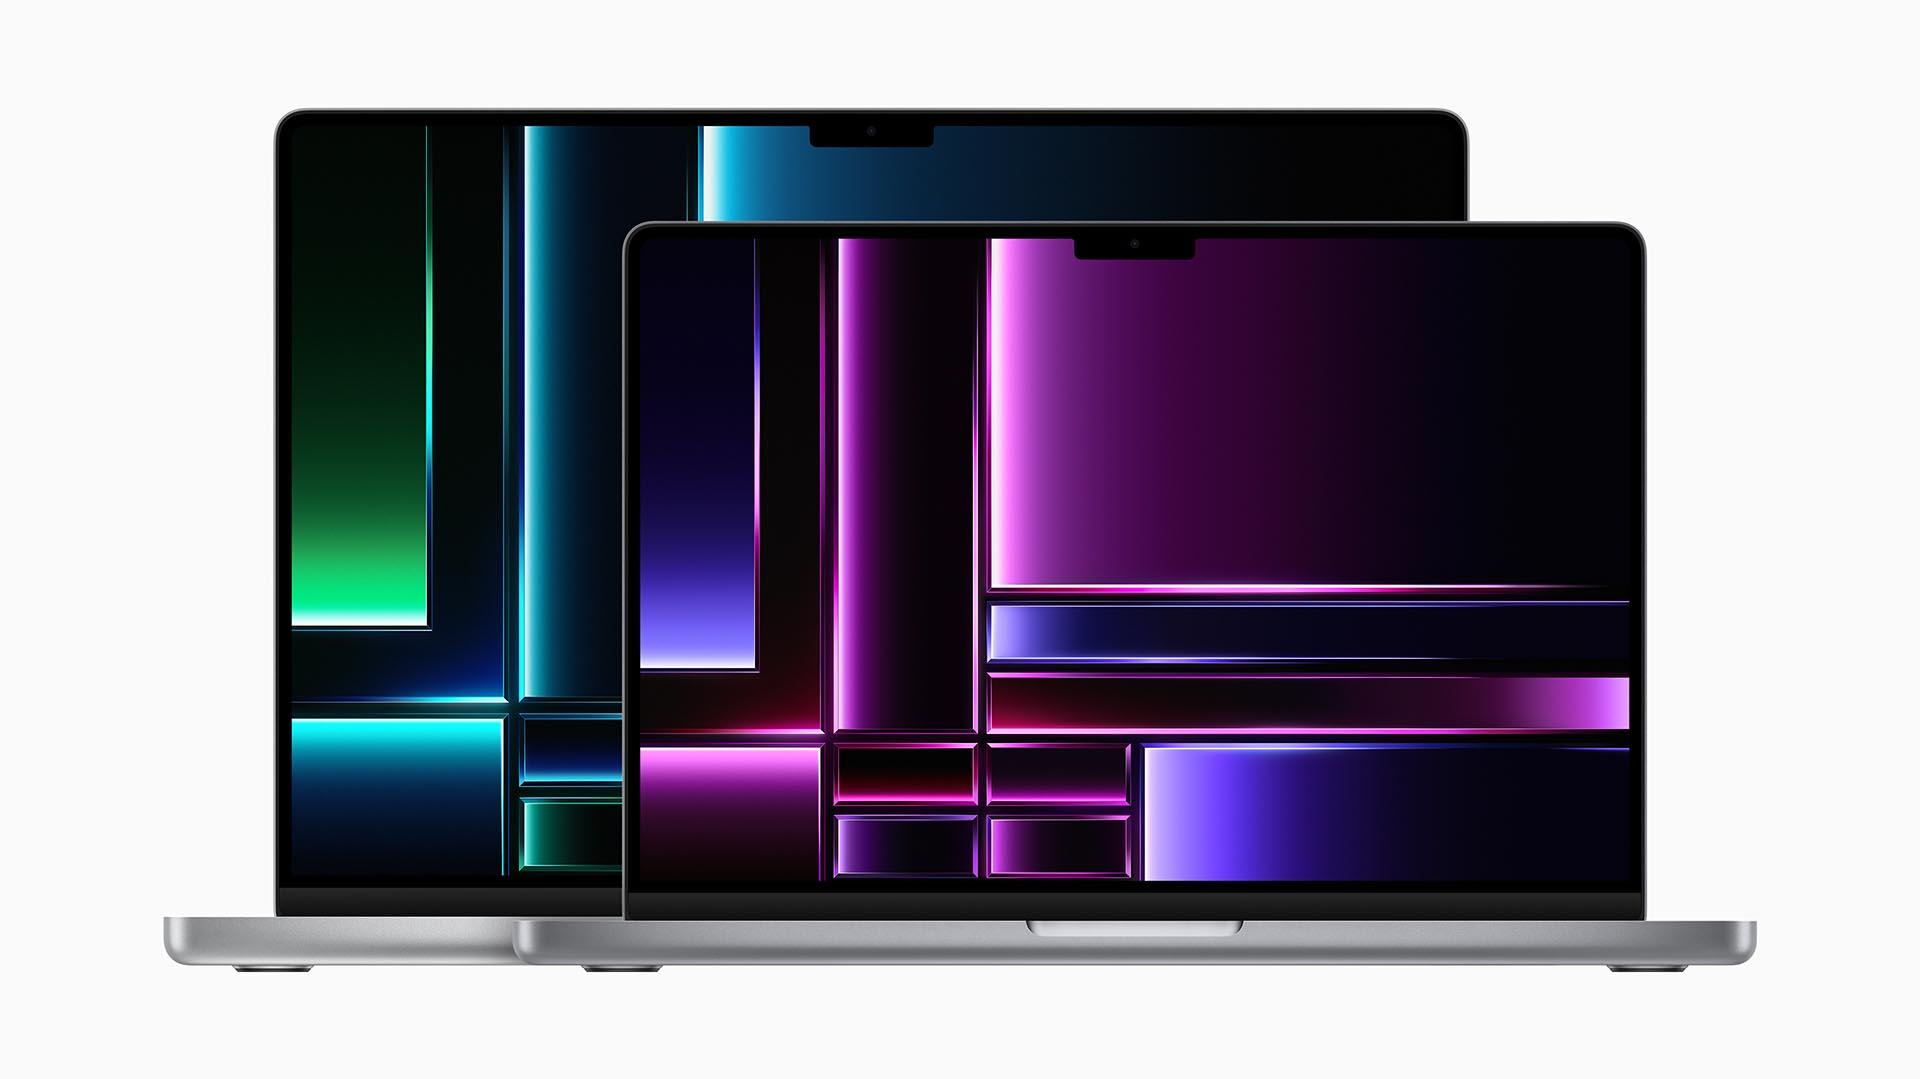 The New Macbook Pro Wallpaper In Green And Magenta Here